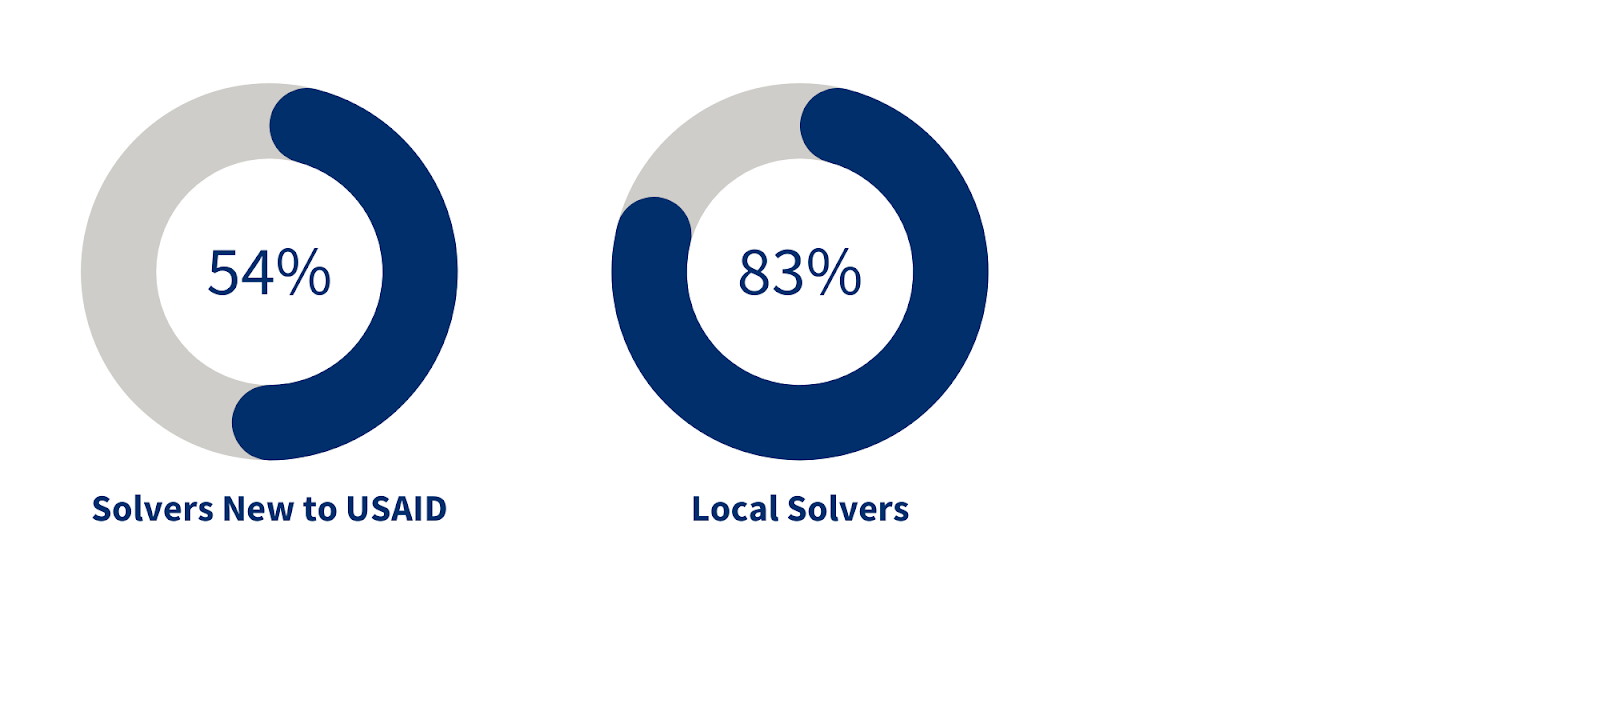 54% solvers new to USAID; 83% local solvers